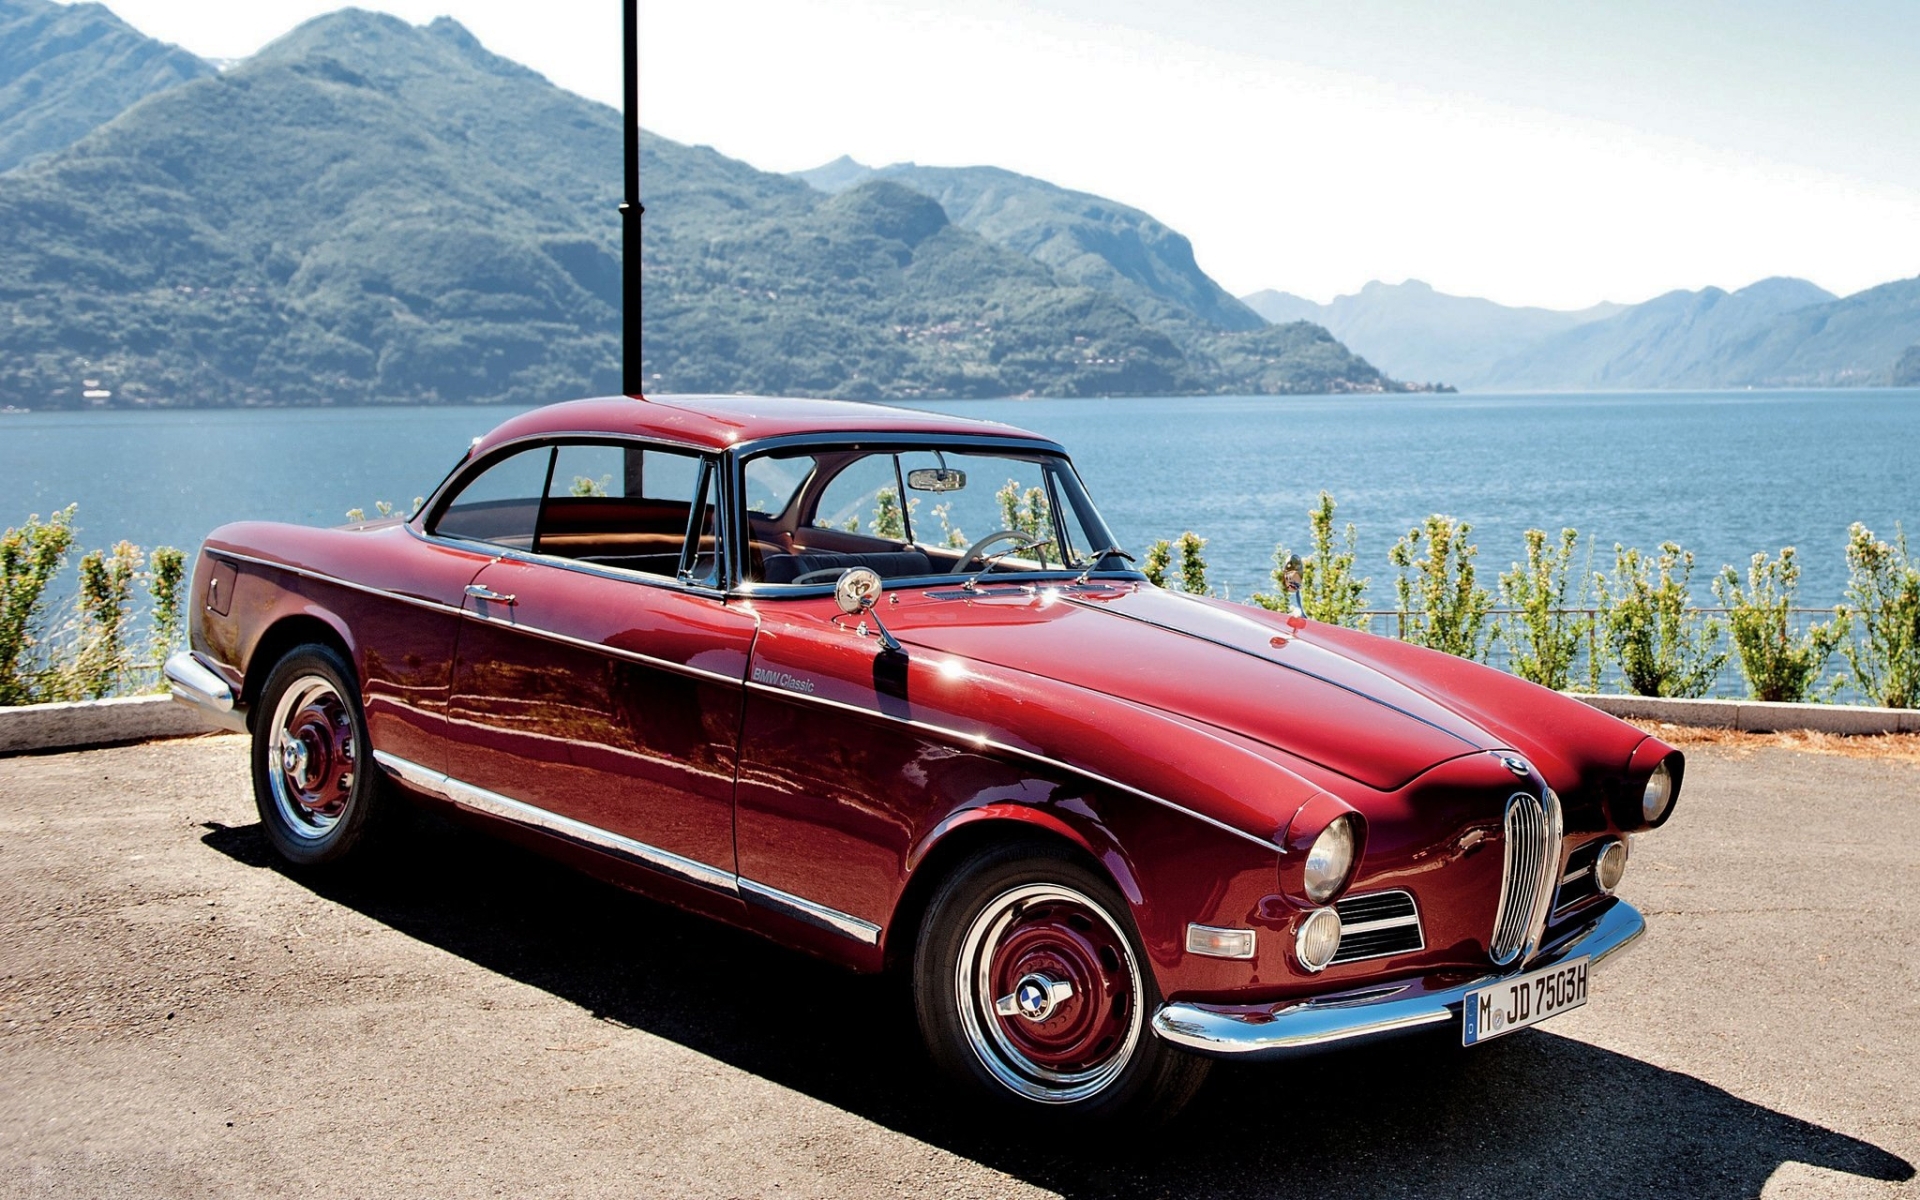 1956, Bmw, 503, Coupe, Retro, Vehicles, Cars, Auto, Old, Classic, Wheels, Red, Chrome, Scenic, Mountains, Hills, Lakes, Water, Ba Wallpaper